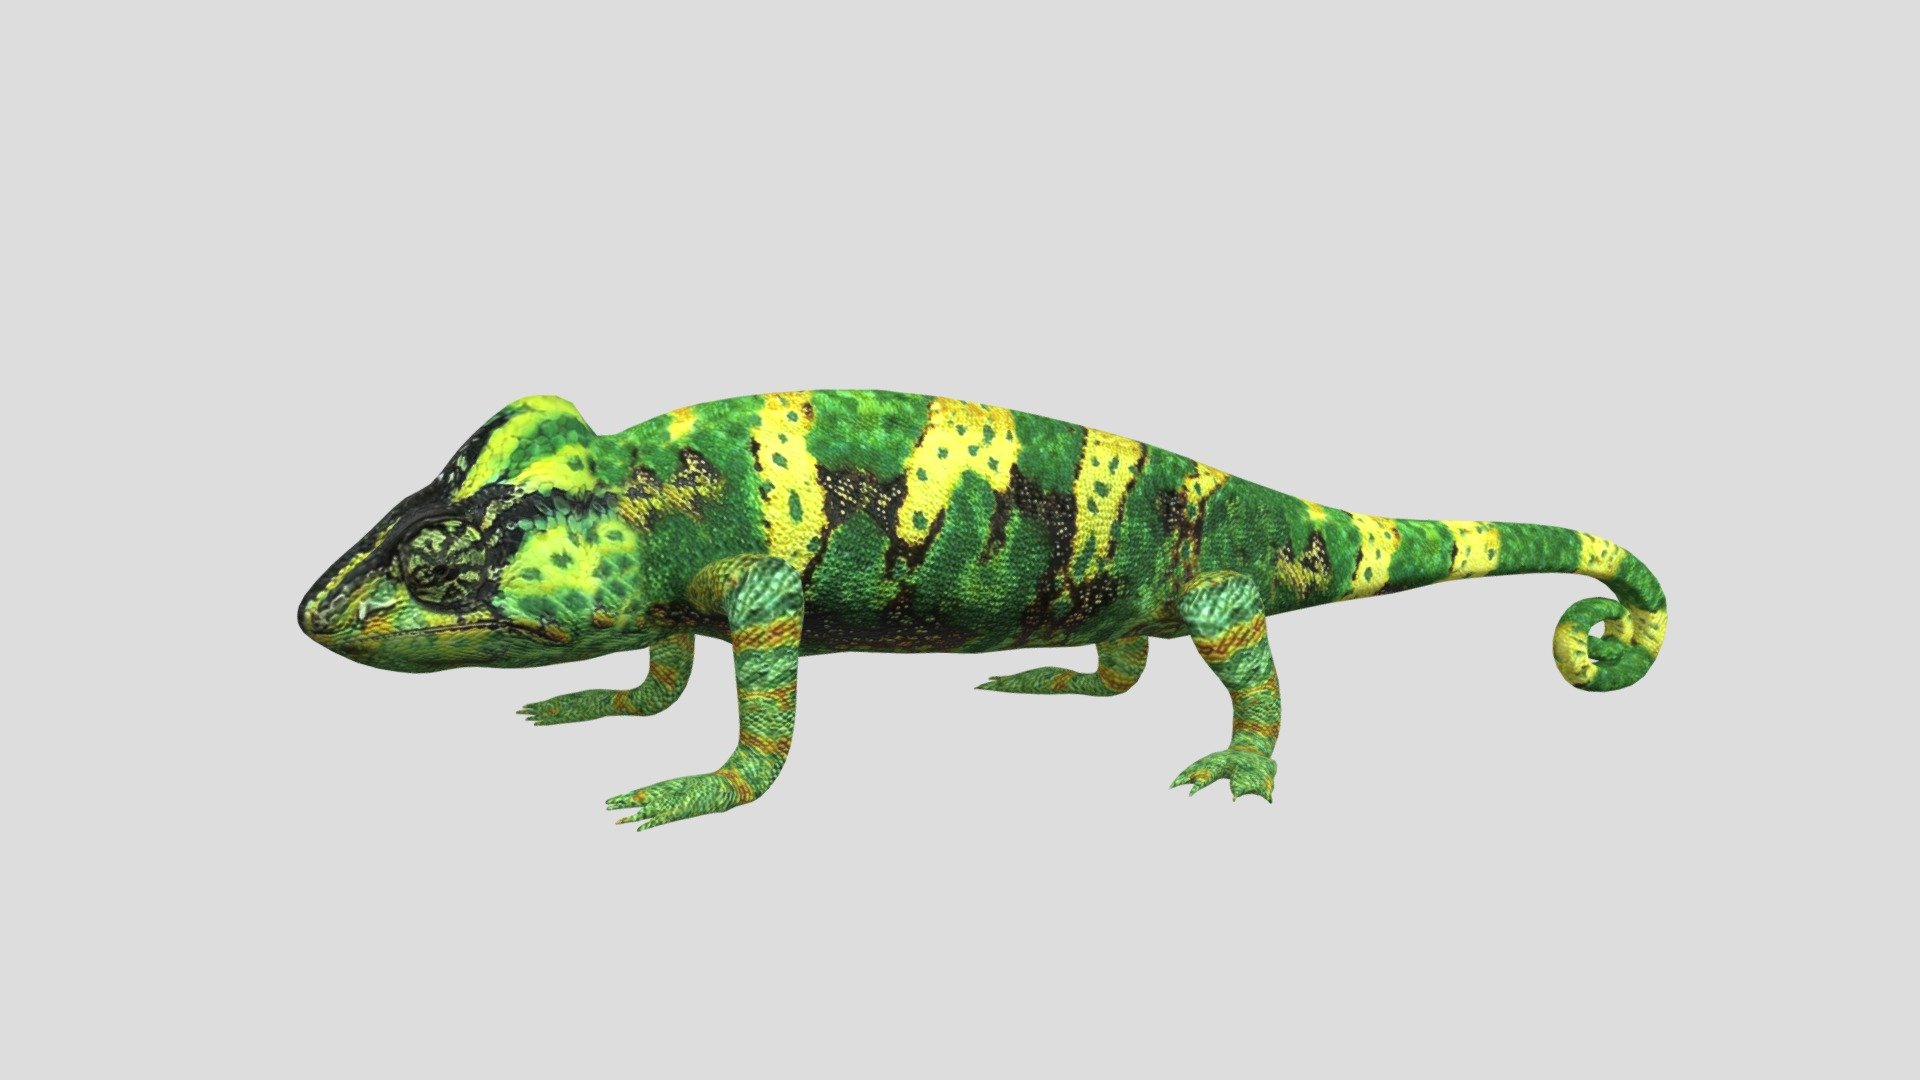 3d model of chameleon.
Product includes:
3d file - one mesh object
Real world scale.
Textures-Color,Normal and Roughness maps.
Textures size-2048x2048 pxls JPEGs 3d model